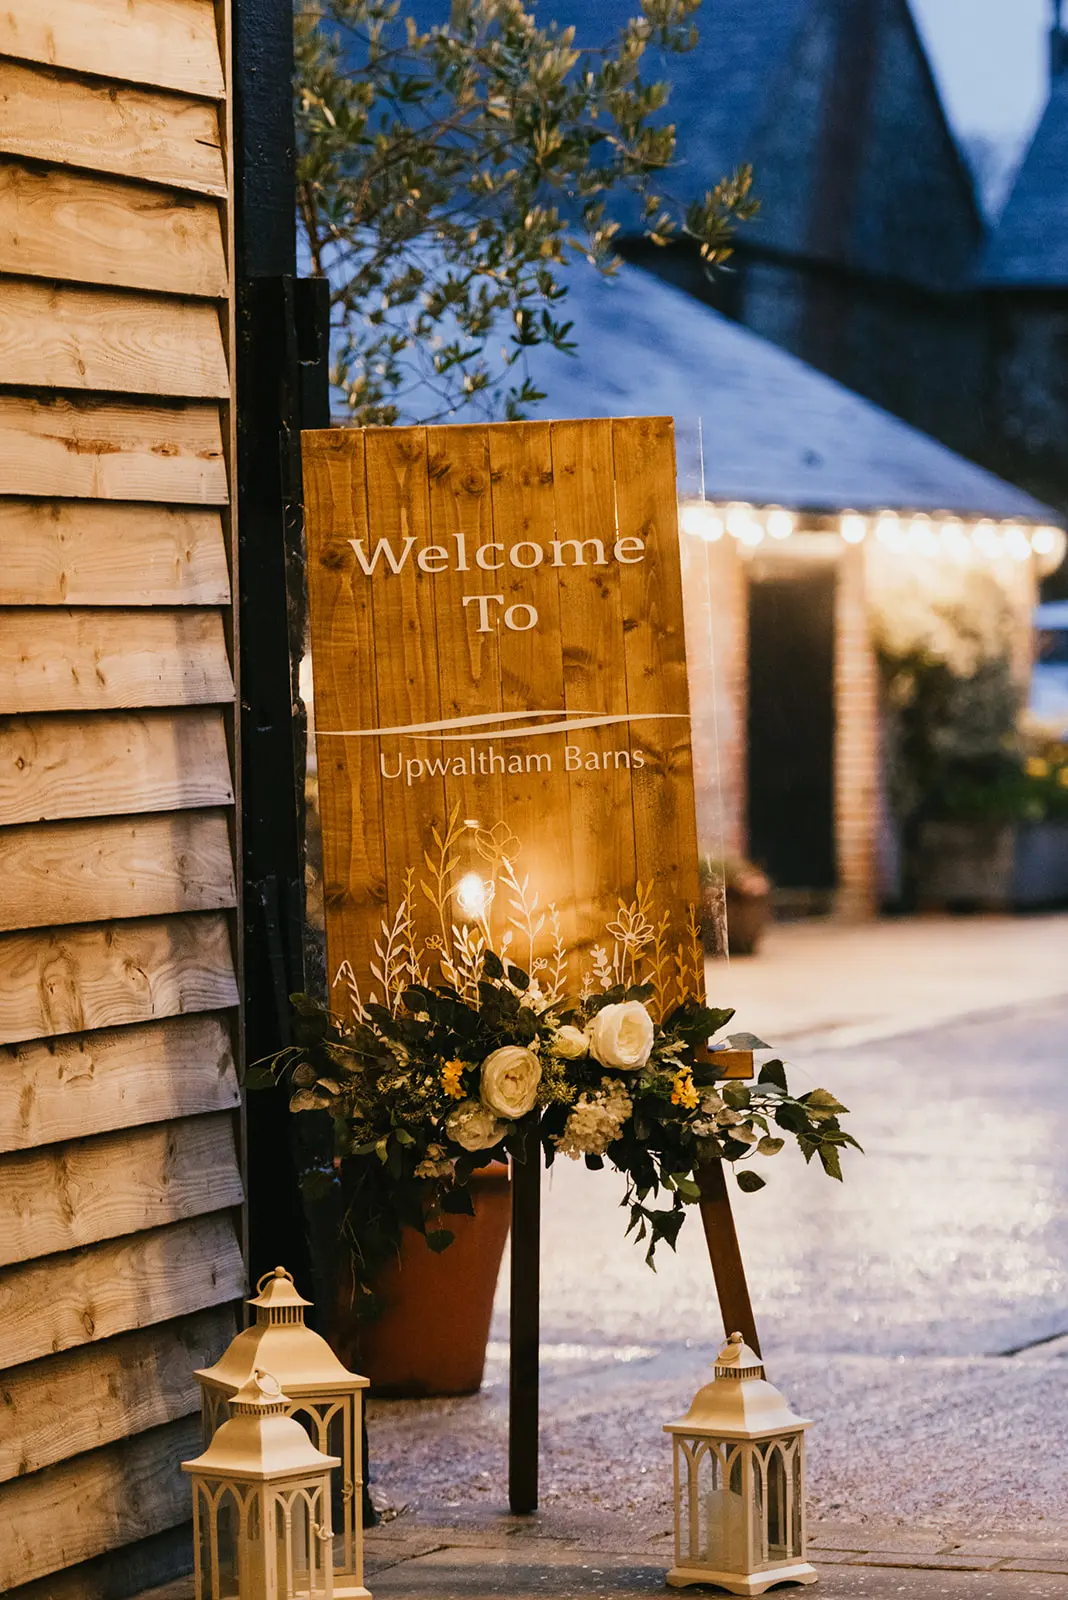 Upwaltham Barns wedding experience welcome sign